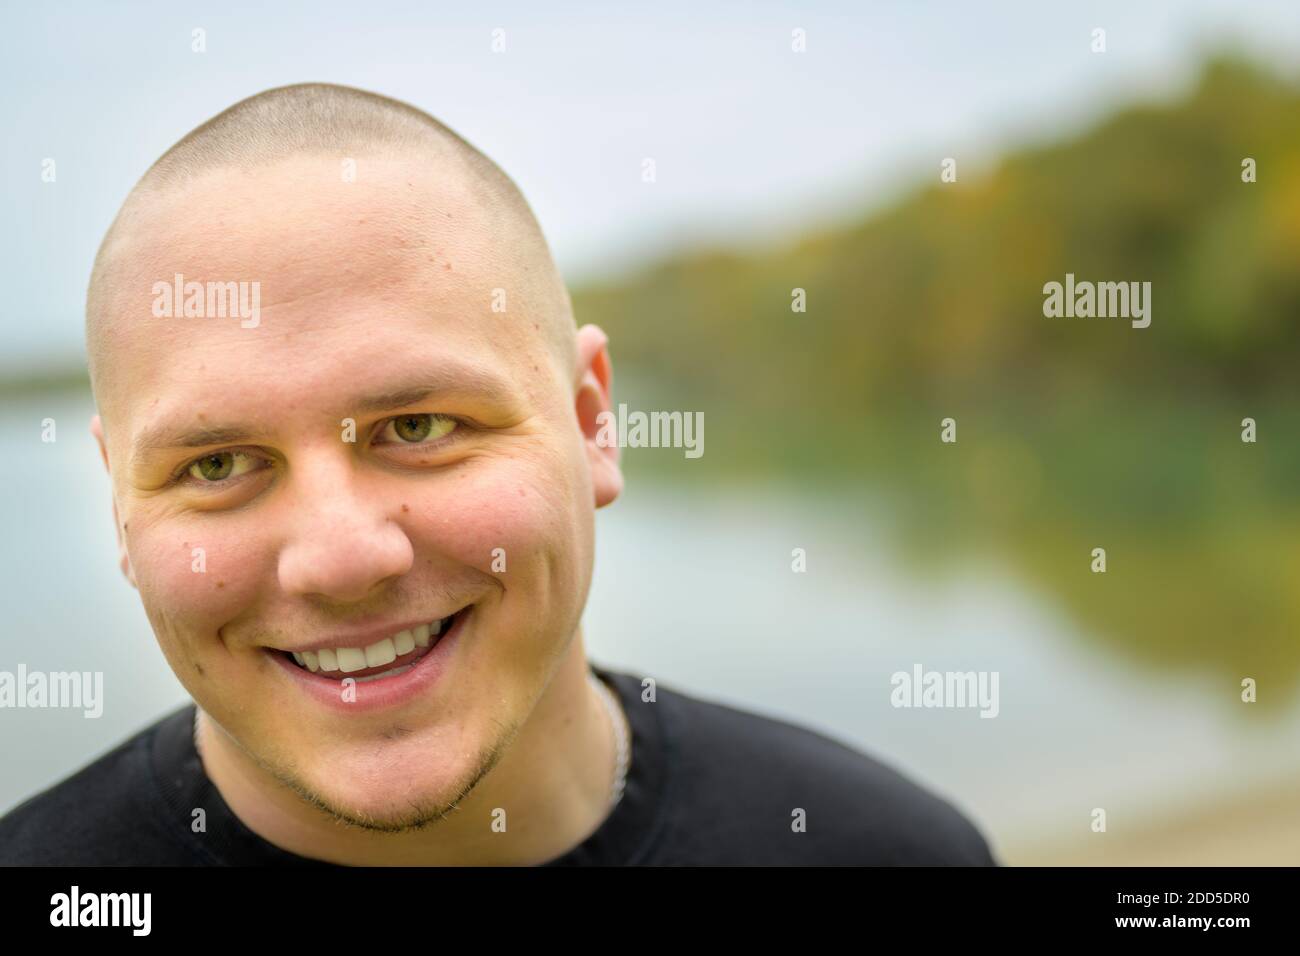 Unshaven young man with a lovely warm friendly smile in a close up head portrait looking to the side of the frame with tranquil lake background Stock Photo